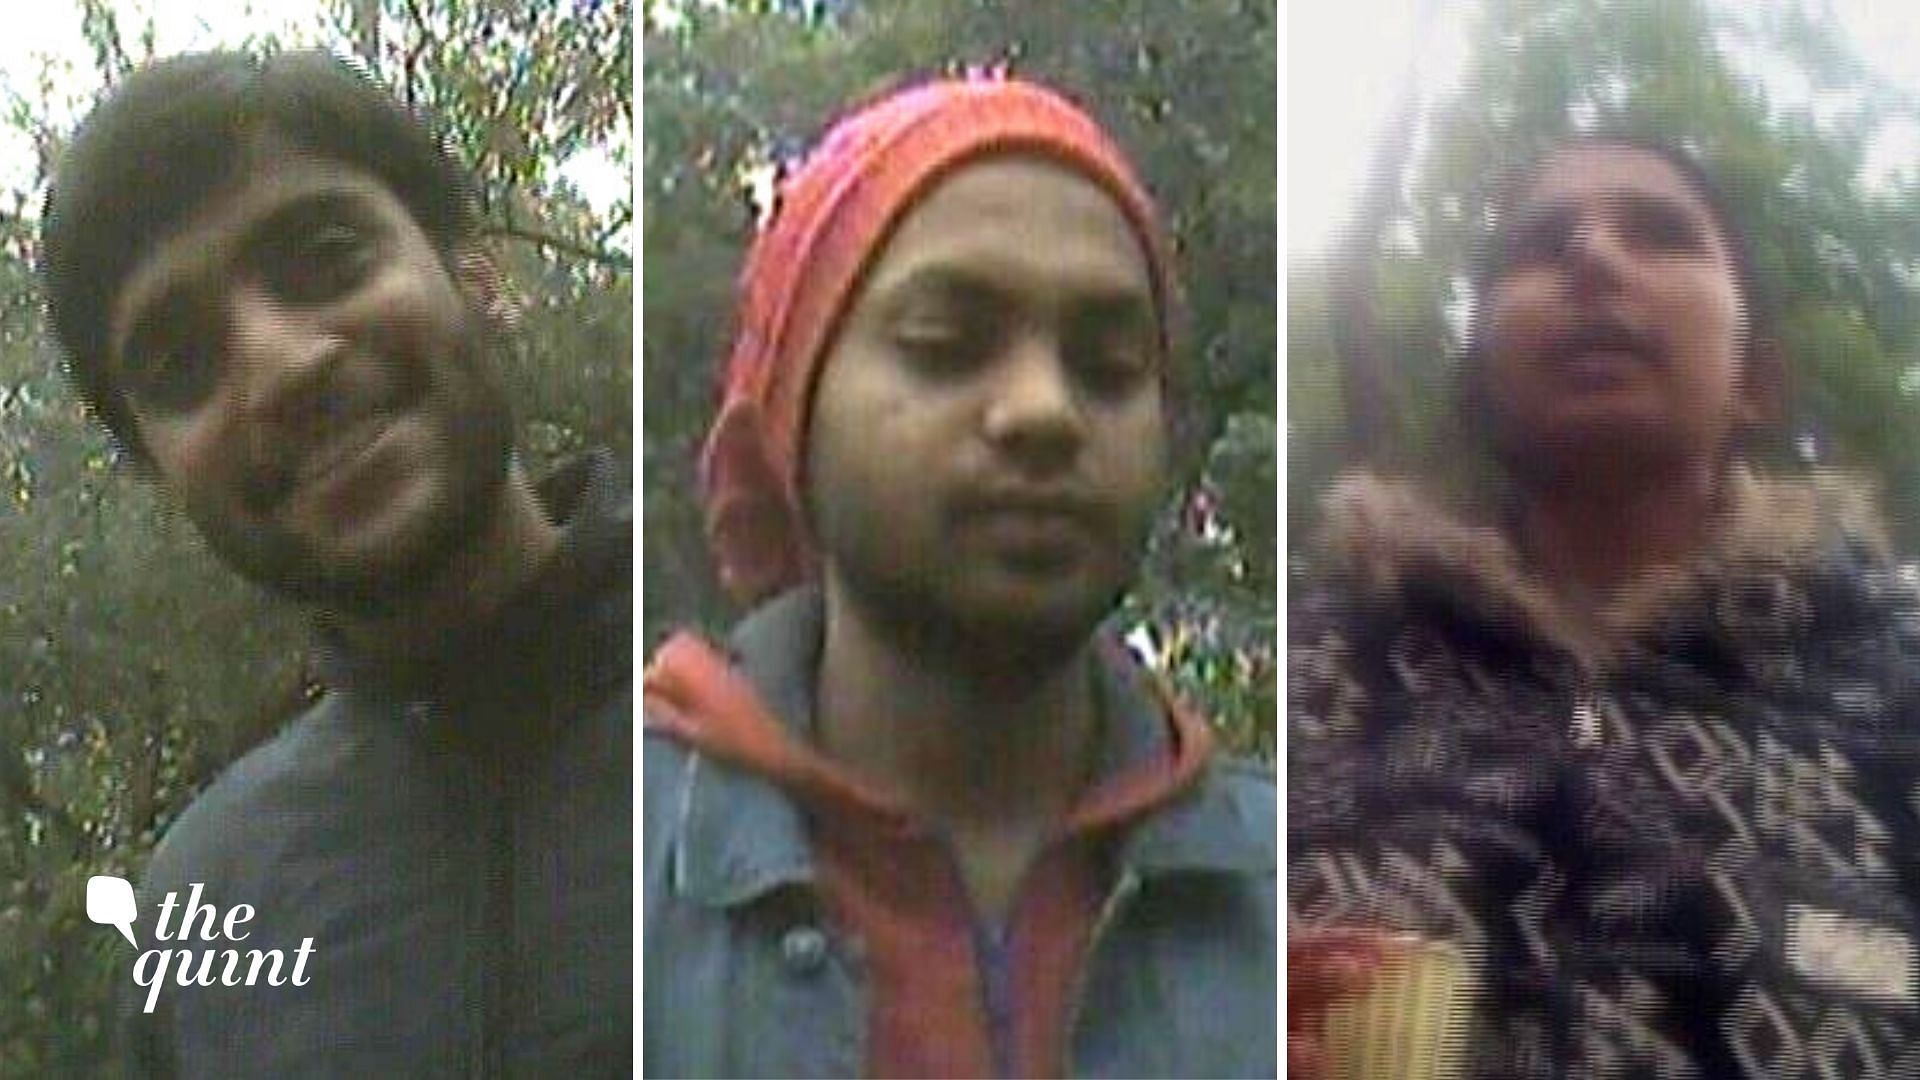 JNU students Akshat Awasthi (left), Rohit Shah (centre) and Geeta Kumari (right) have been named in the India Today sting operation.